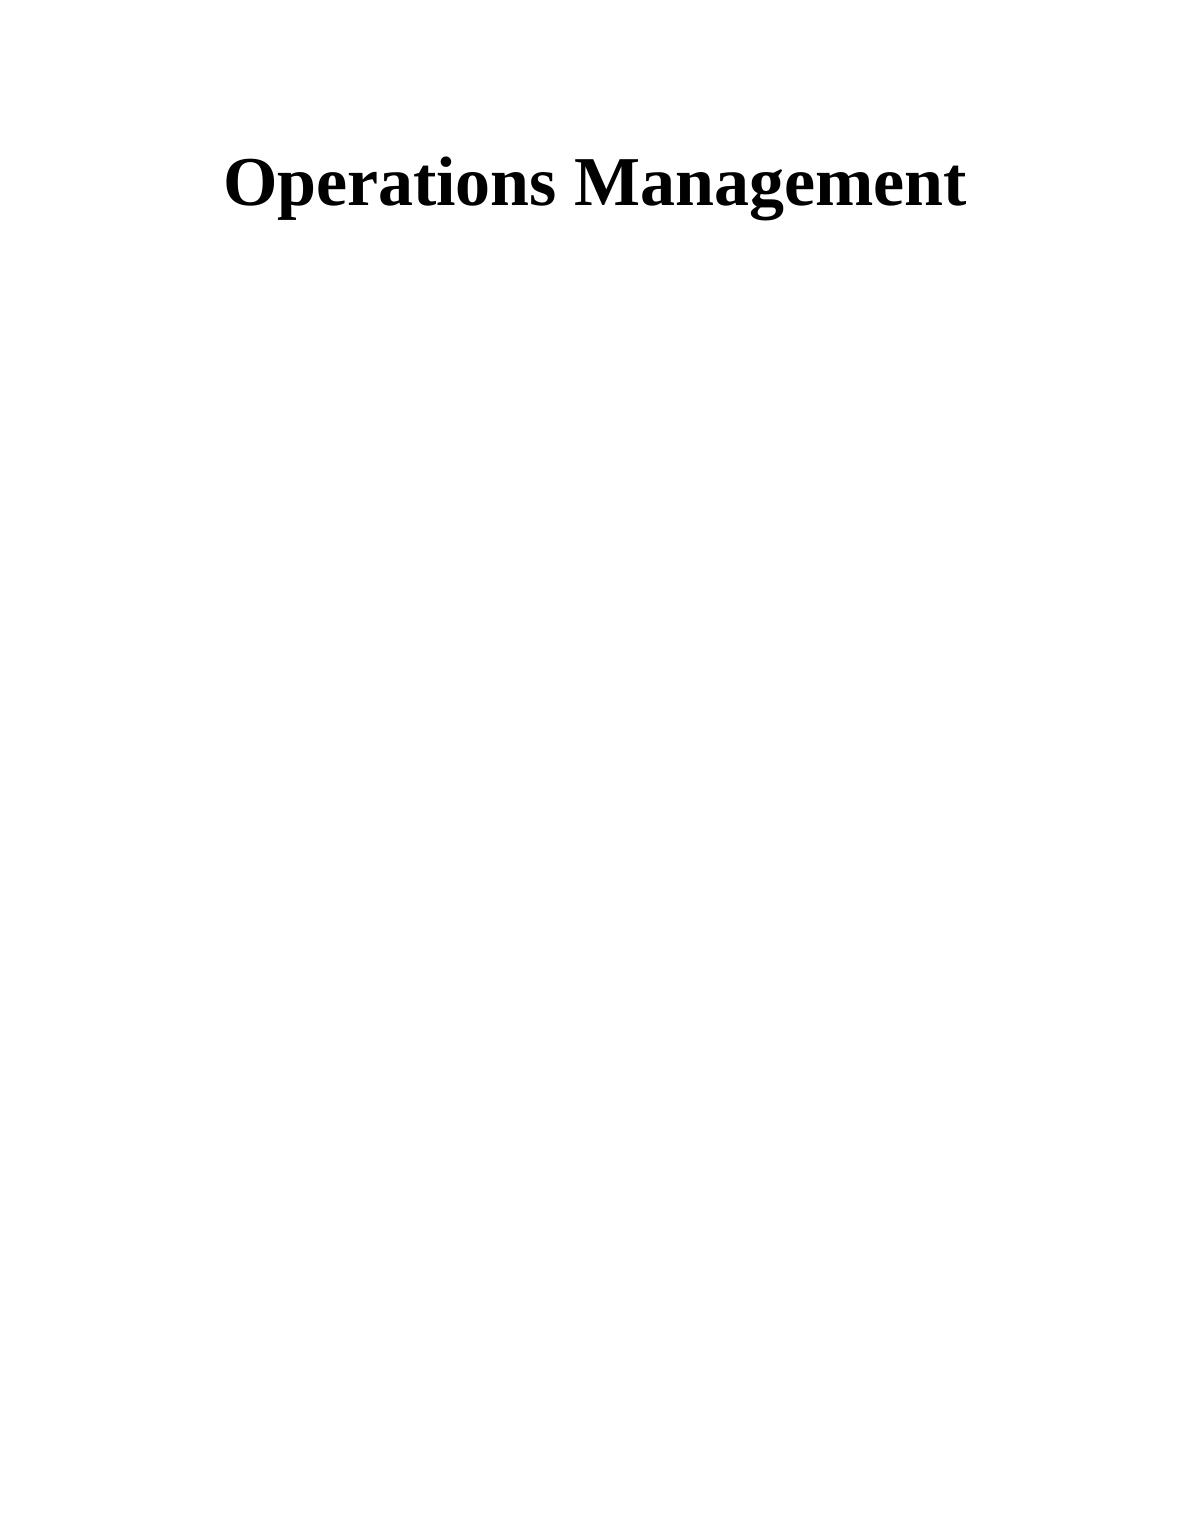 Operations Management in Starbucks- Assignment_1